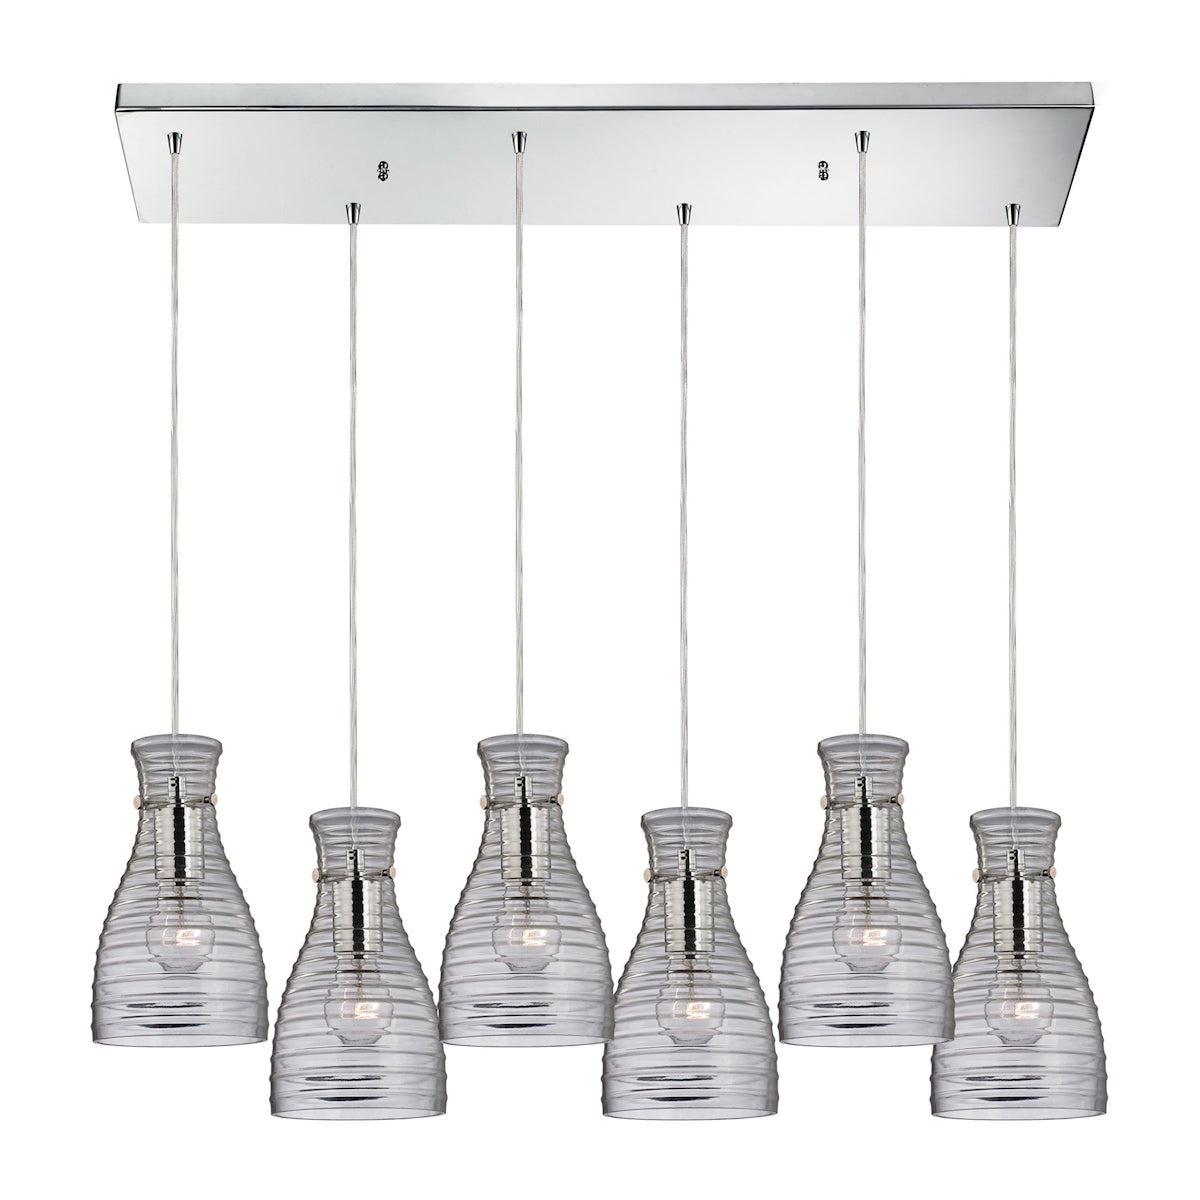 ELK Lighting 46107/6RC Strata 6-Light Rectangular Pendant Fixture in Polished Chrome with Ribbed Blown Glass